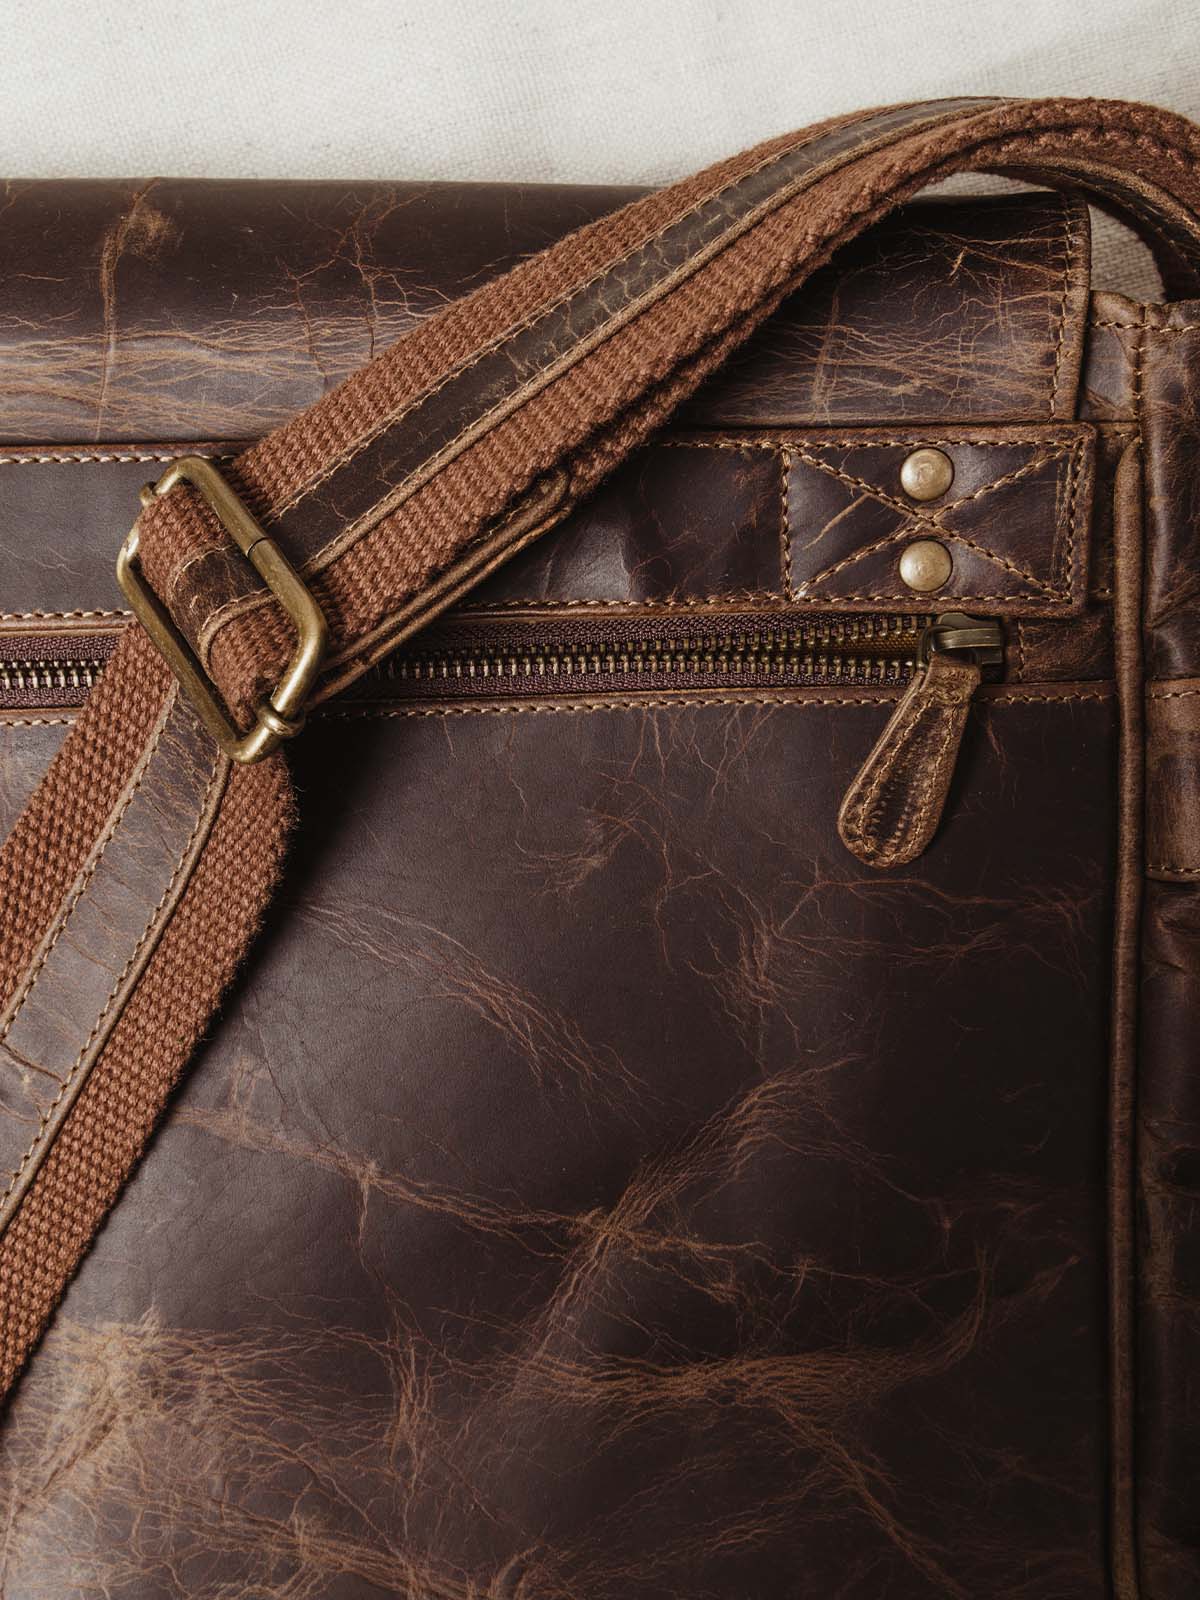 Close up of quality dark leather, exterior zipper, and adjustable shoulder strap.